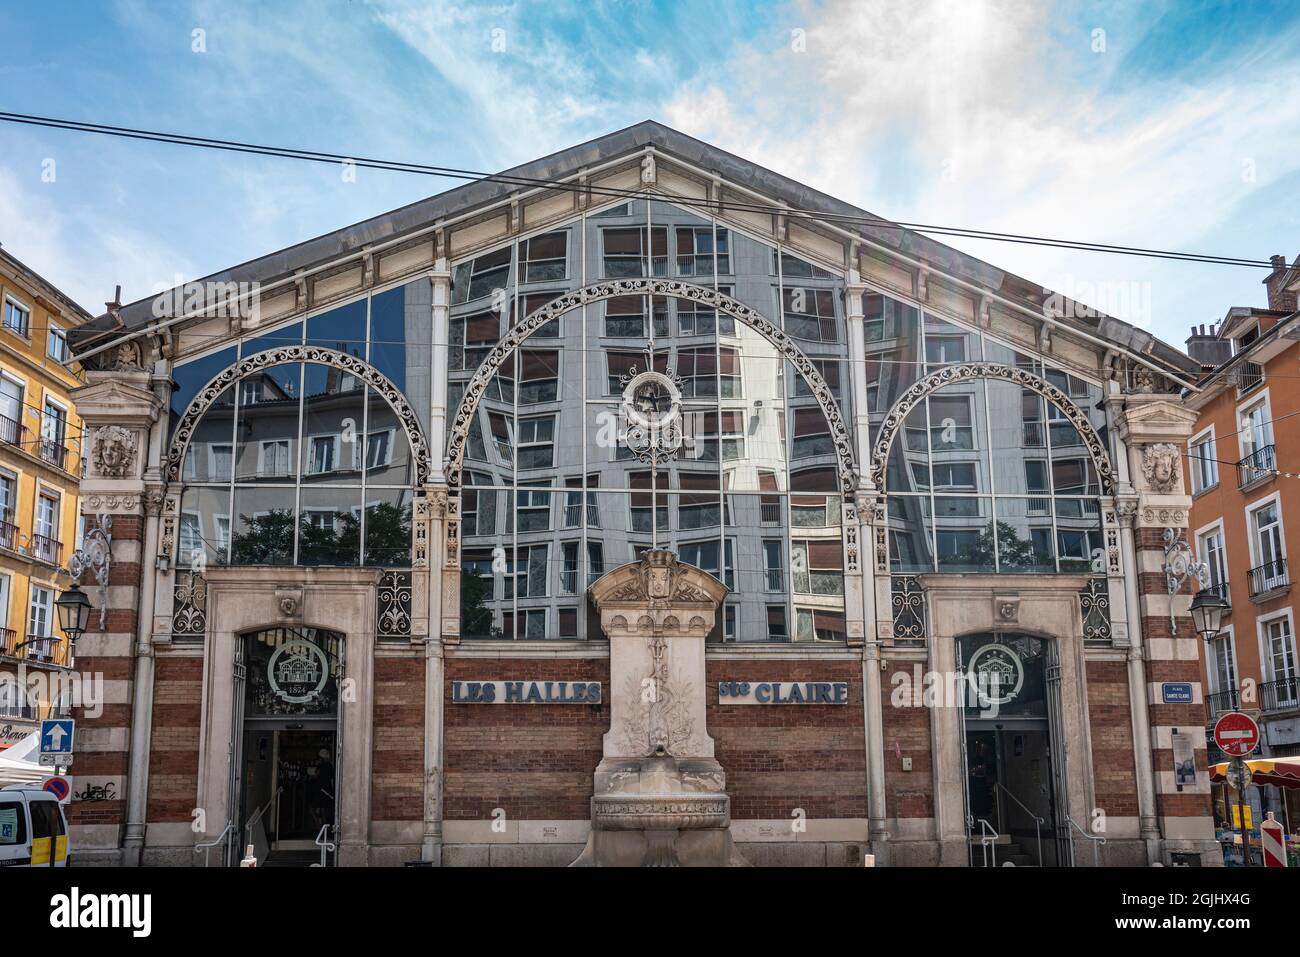 Halls of Sainte Claire, covered market seen from the outside, city of Grenoble.Auvergne-Rhône-Alpes region, Isère department, France, Europe Stock Photo